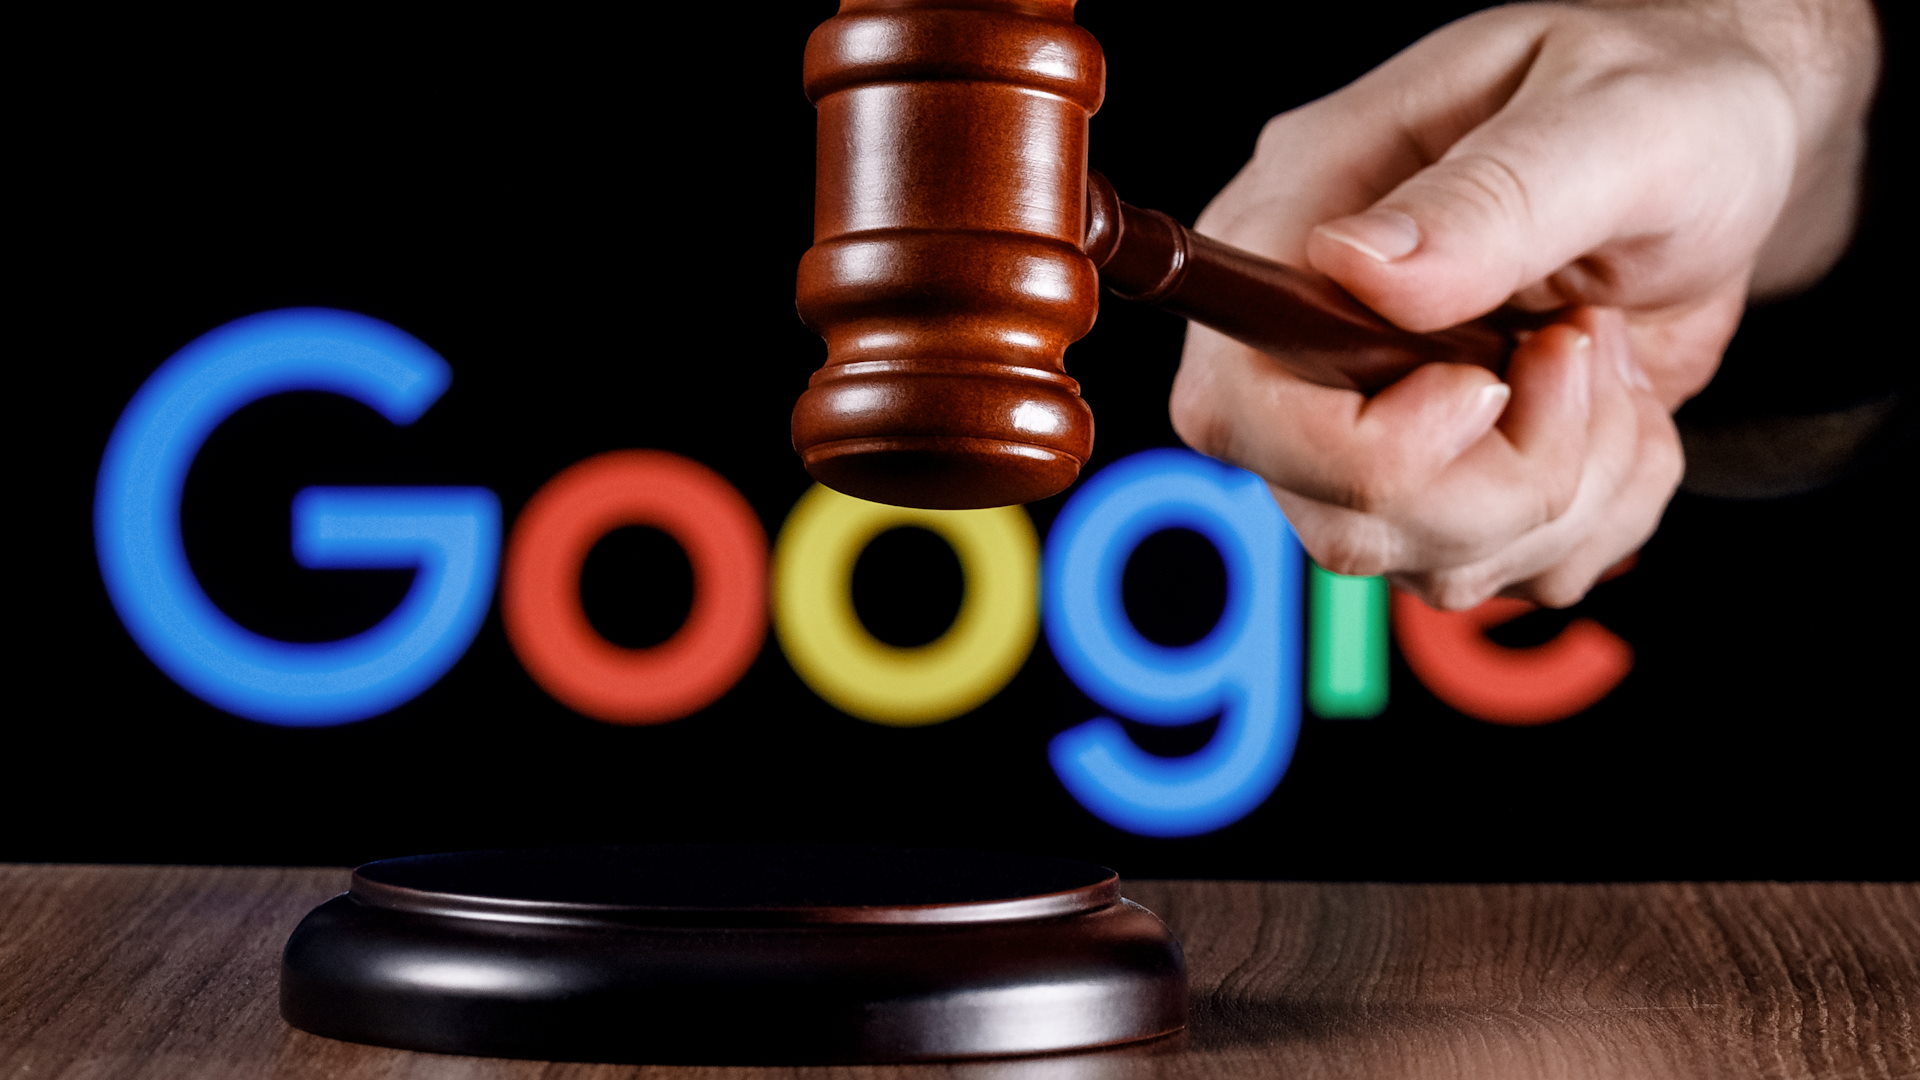 Google avoids trial for tracking activity in incognito mode, agrees to settle